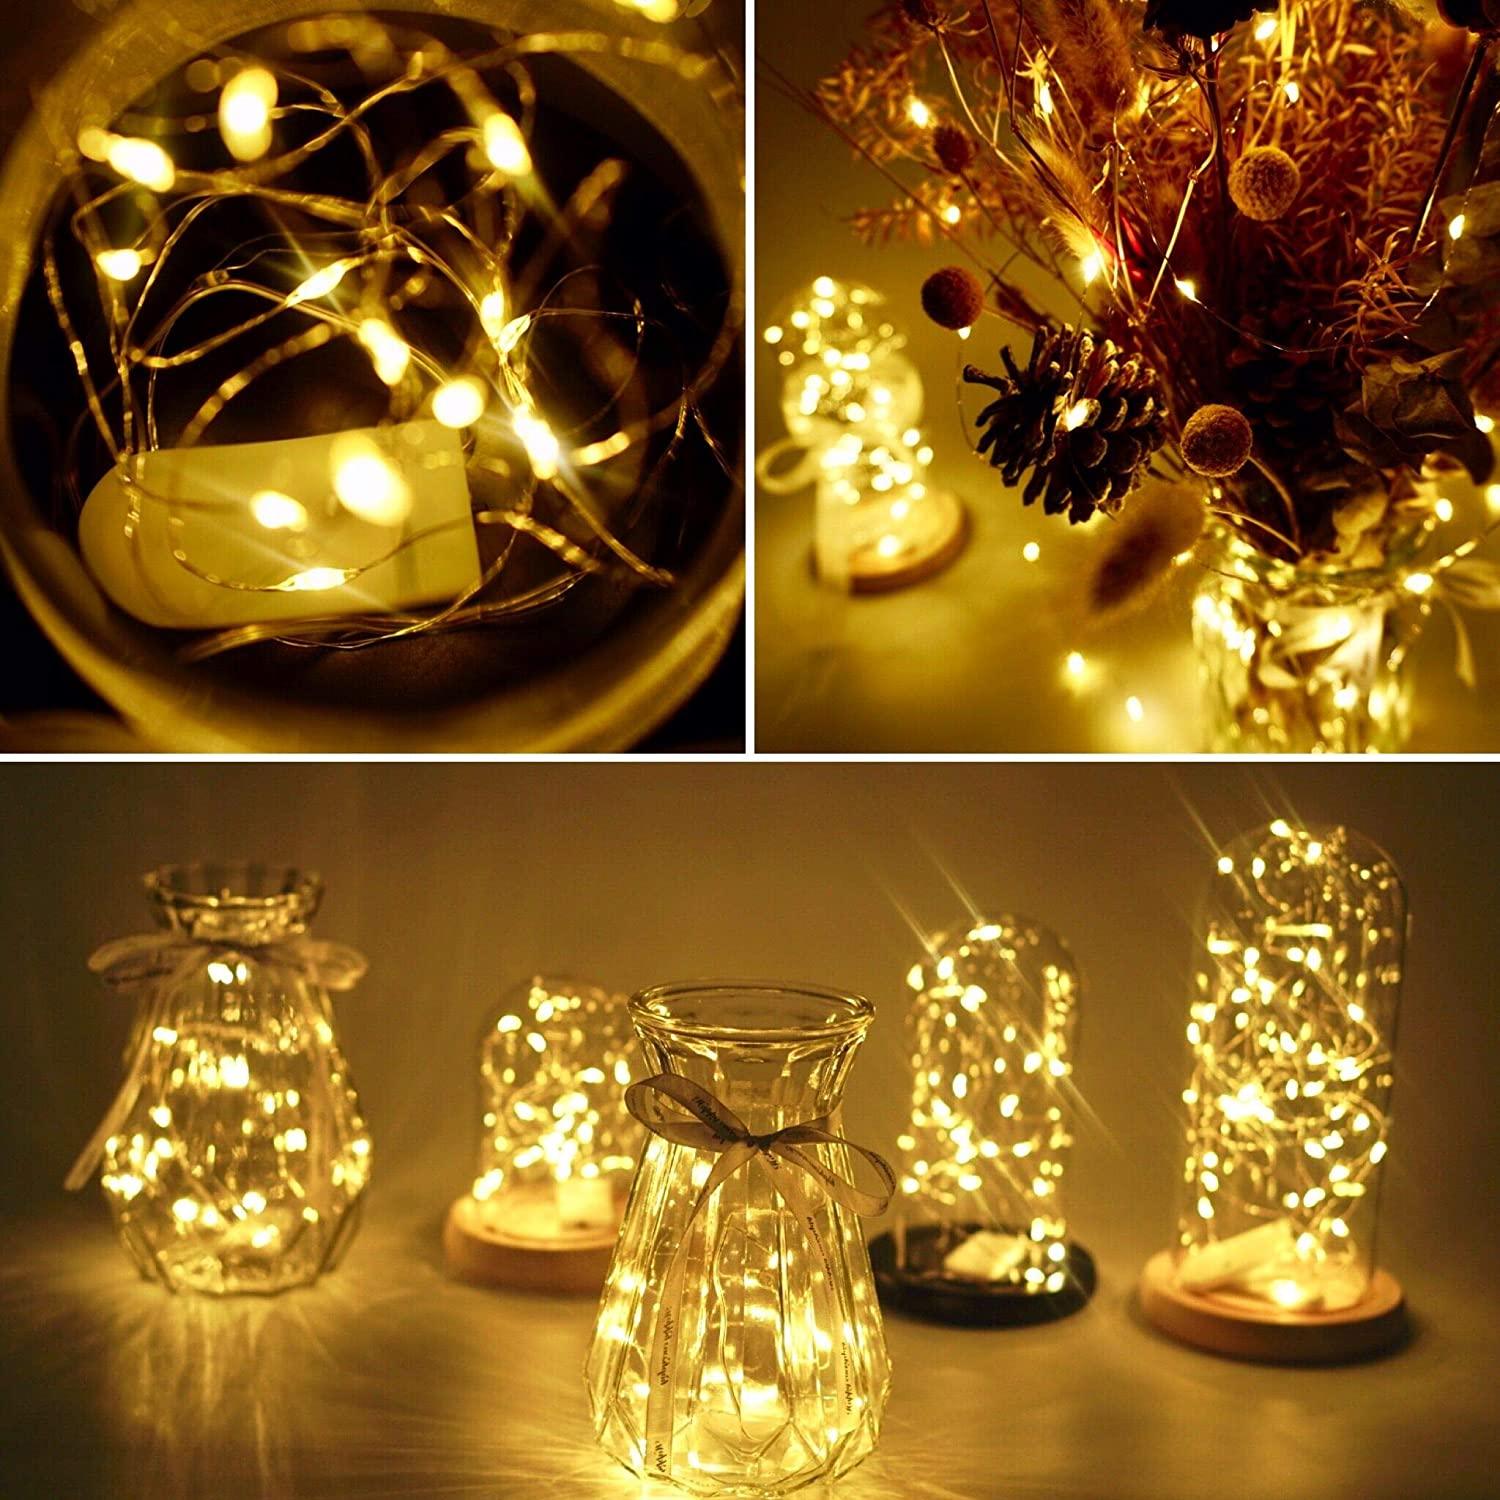 33 Foot - Battery Operated LED Fairy Lights - Waterproof with 100